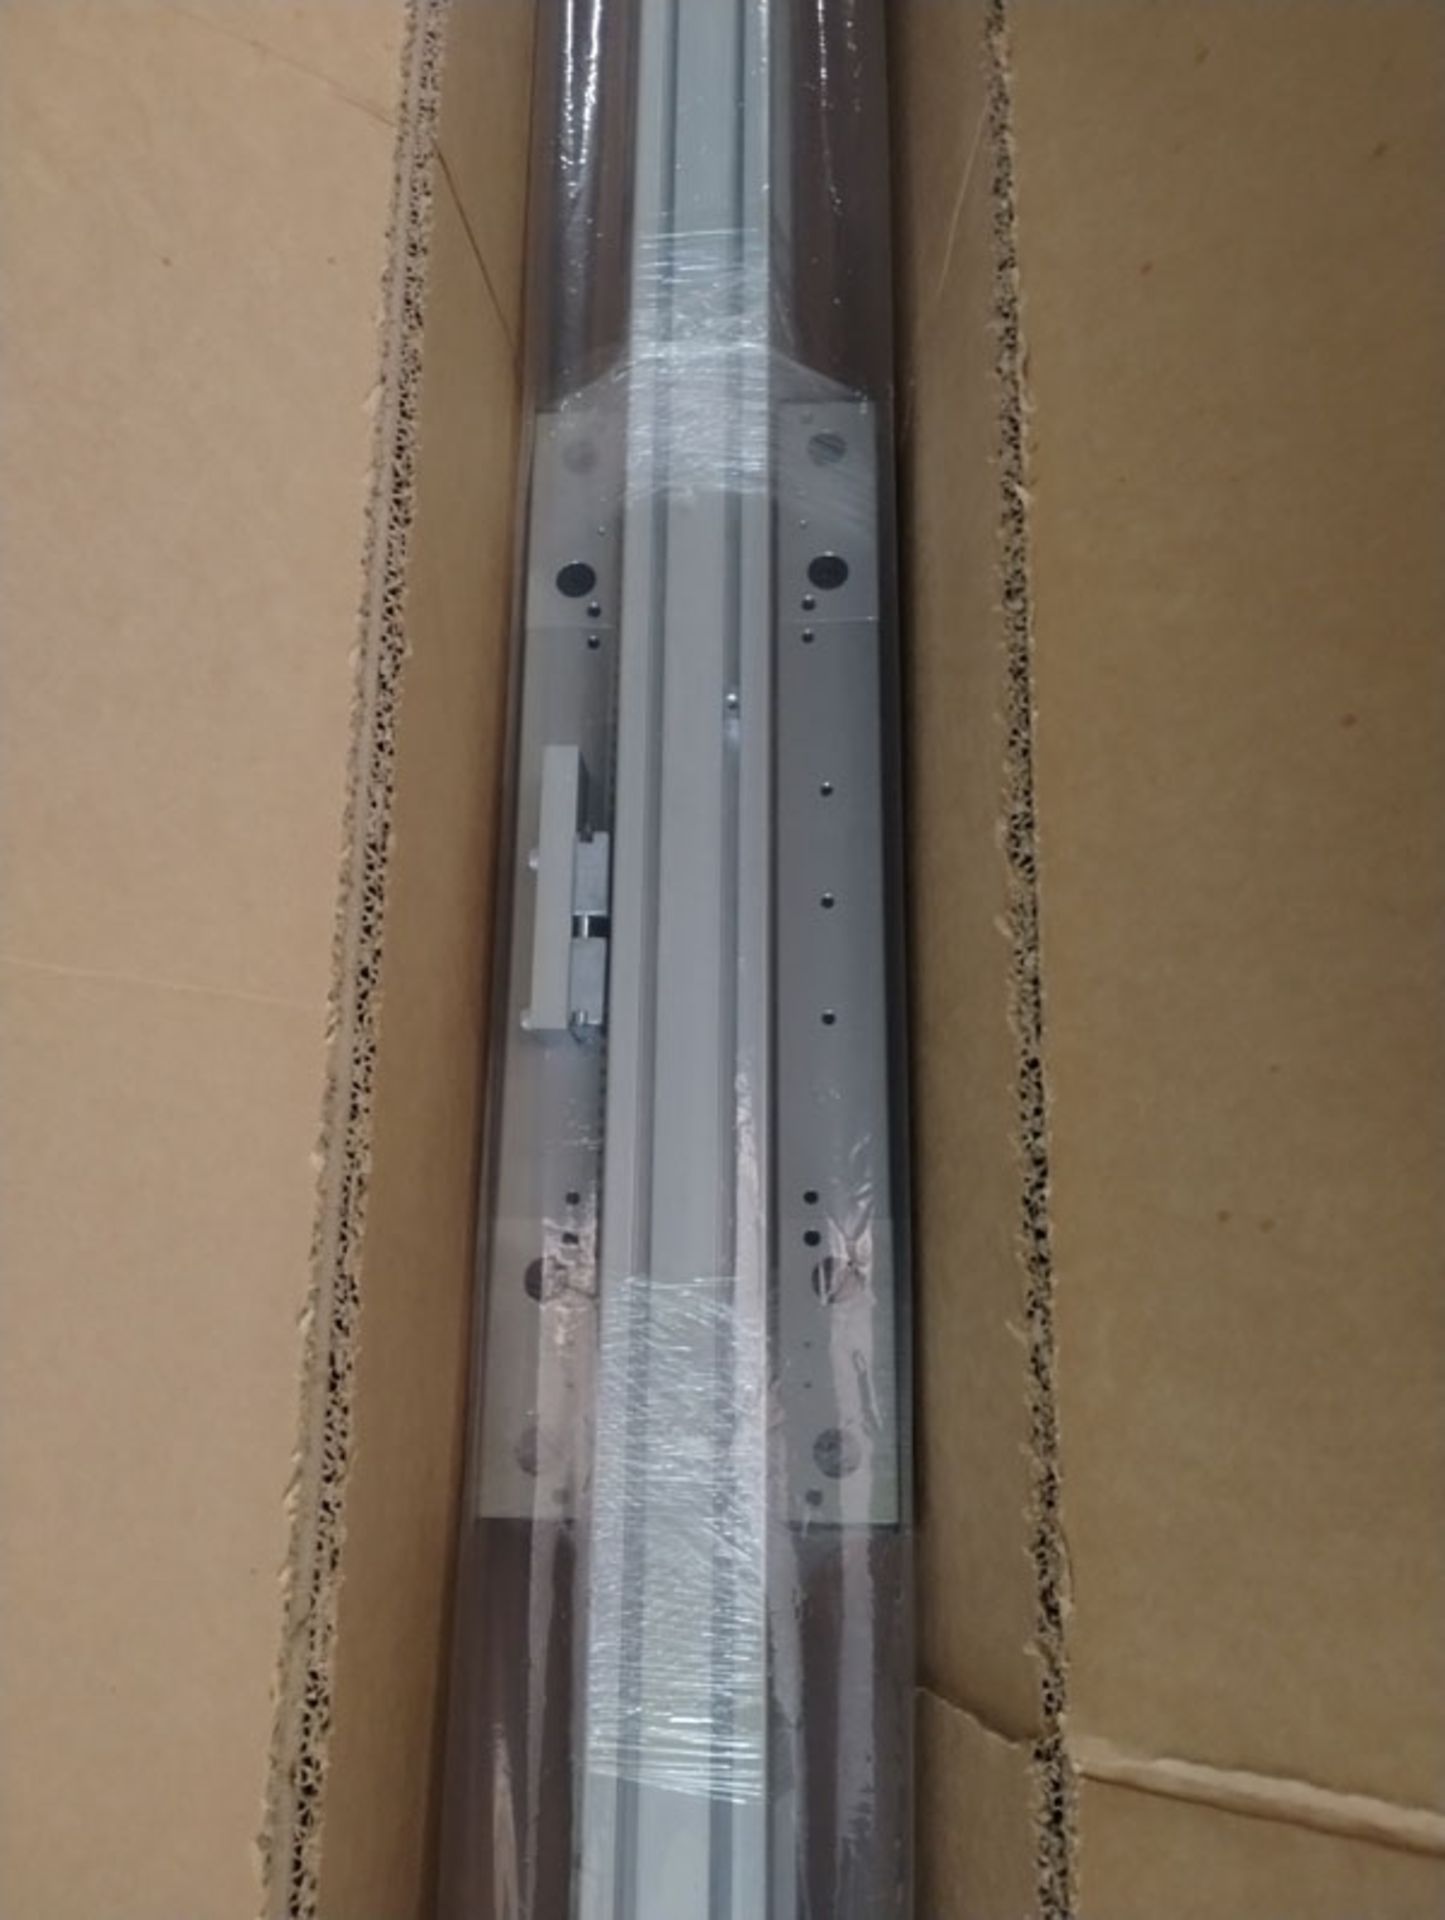 179" LINEAR ACTUATOR PART# 11237C01 --- Lot located at second location: 6800 Union ave. , Cleveland - Image 4 of 6